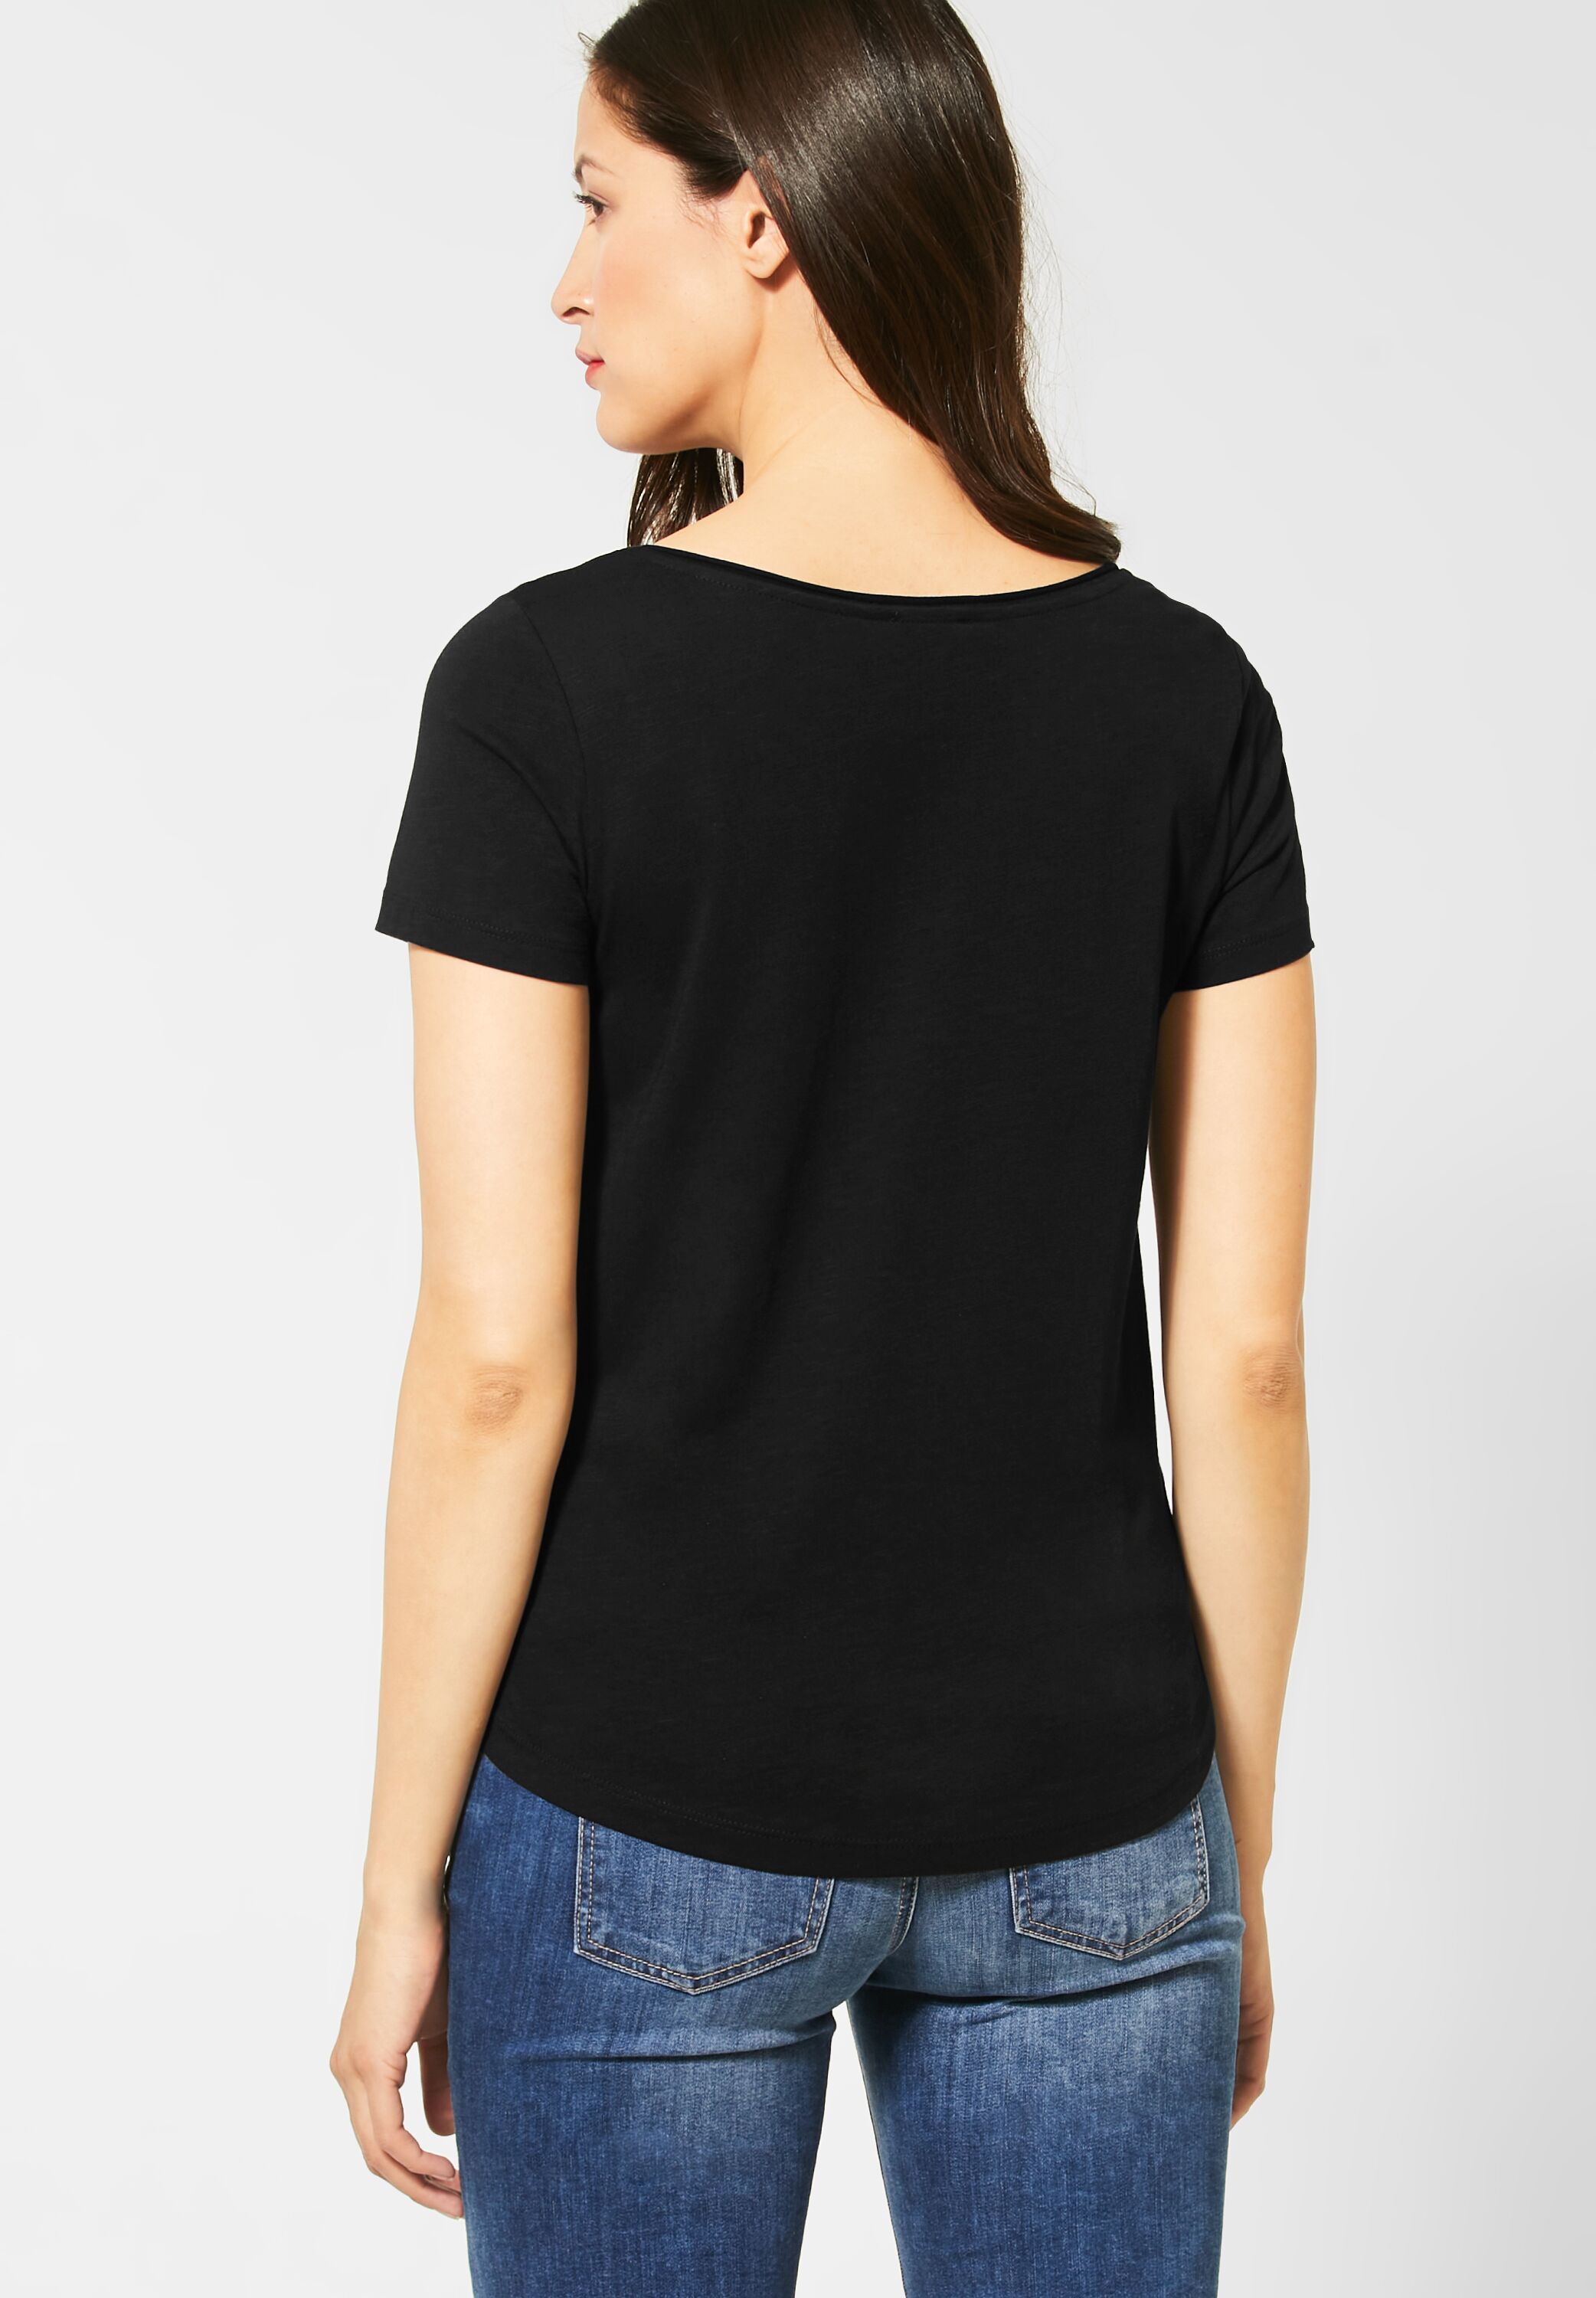 Street One T-Shirt Crista in Black A314797-10001 - CONCEPT Mode